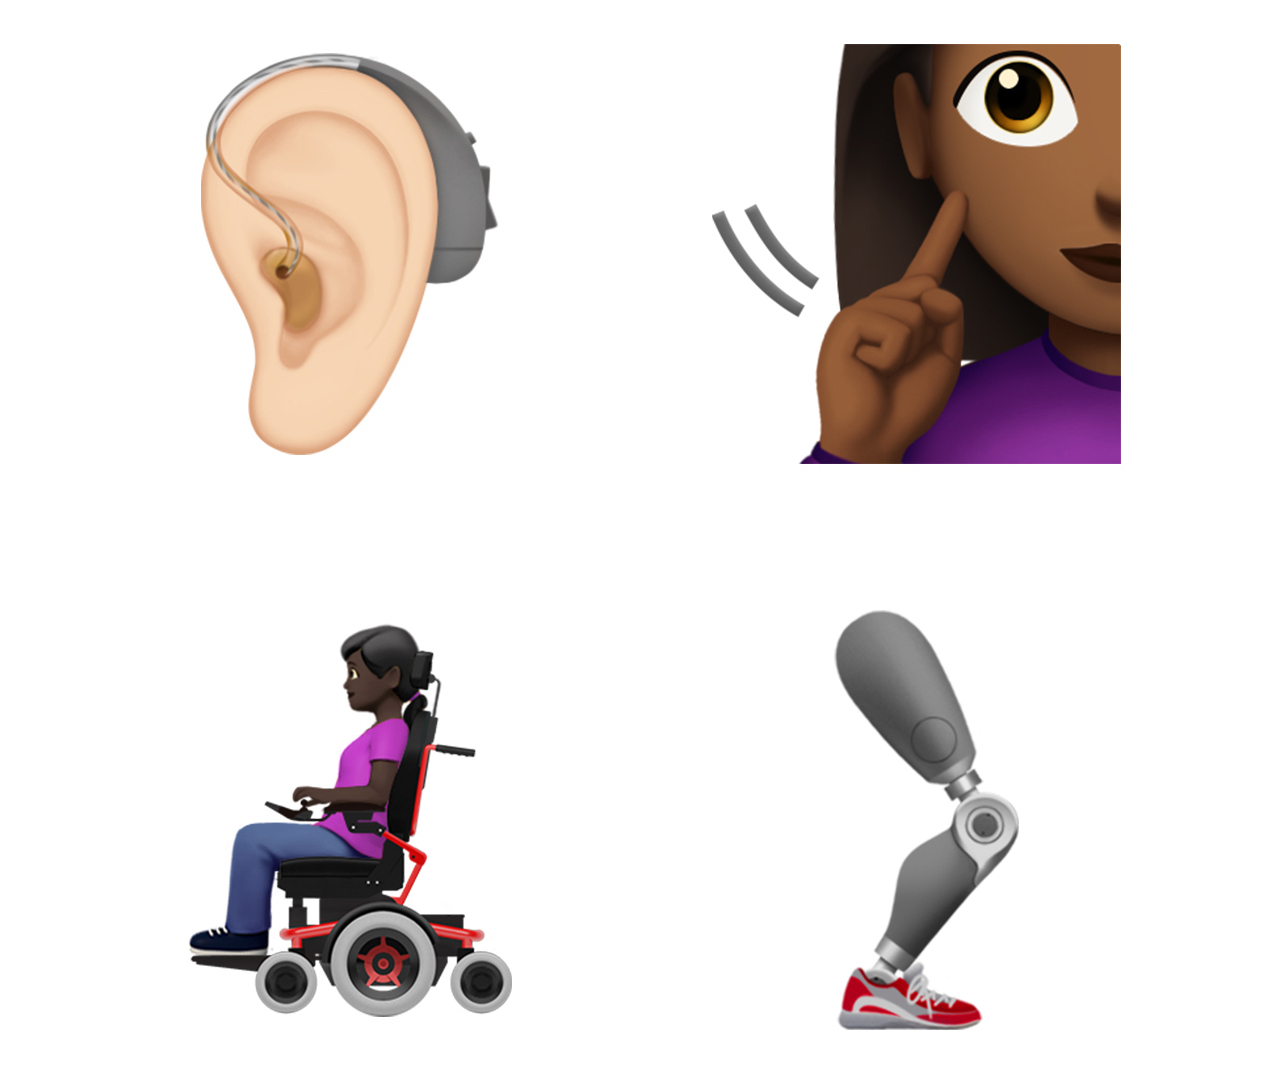 Apple's new disability-themed emoji provide a more inclusive experience for all. There are now options that depict users of both power and self-propelled mobility devices, individuals who communicate using sign language, and individuals who use sight-seeing canes, in addition to prosthetic limbs and hearing aids.